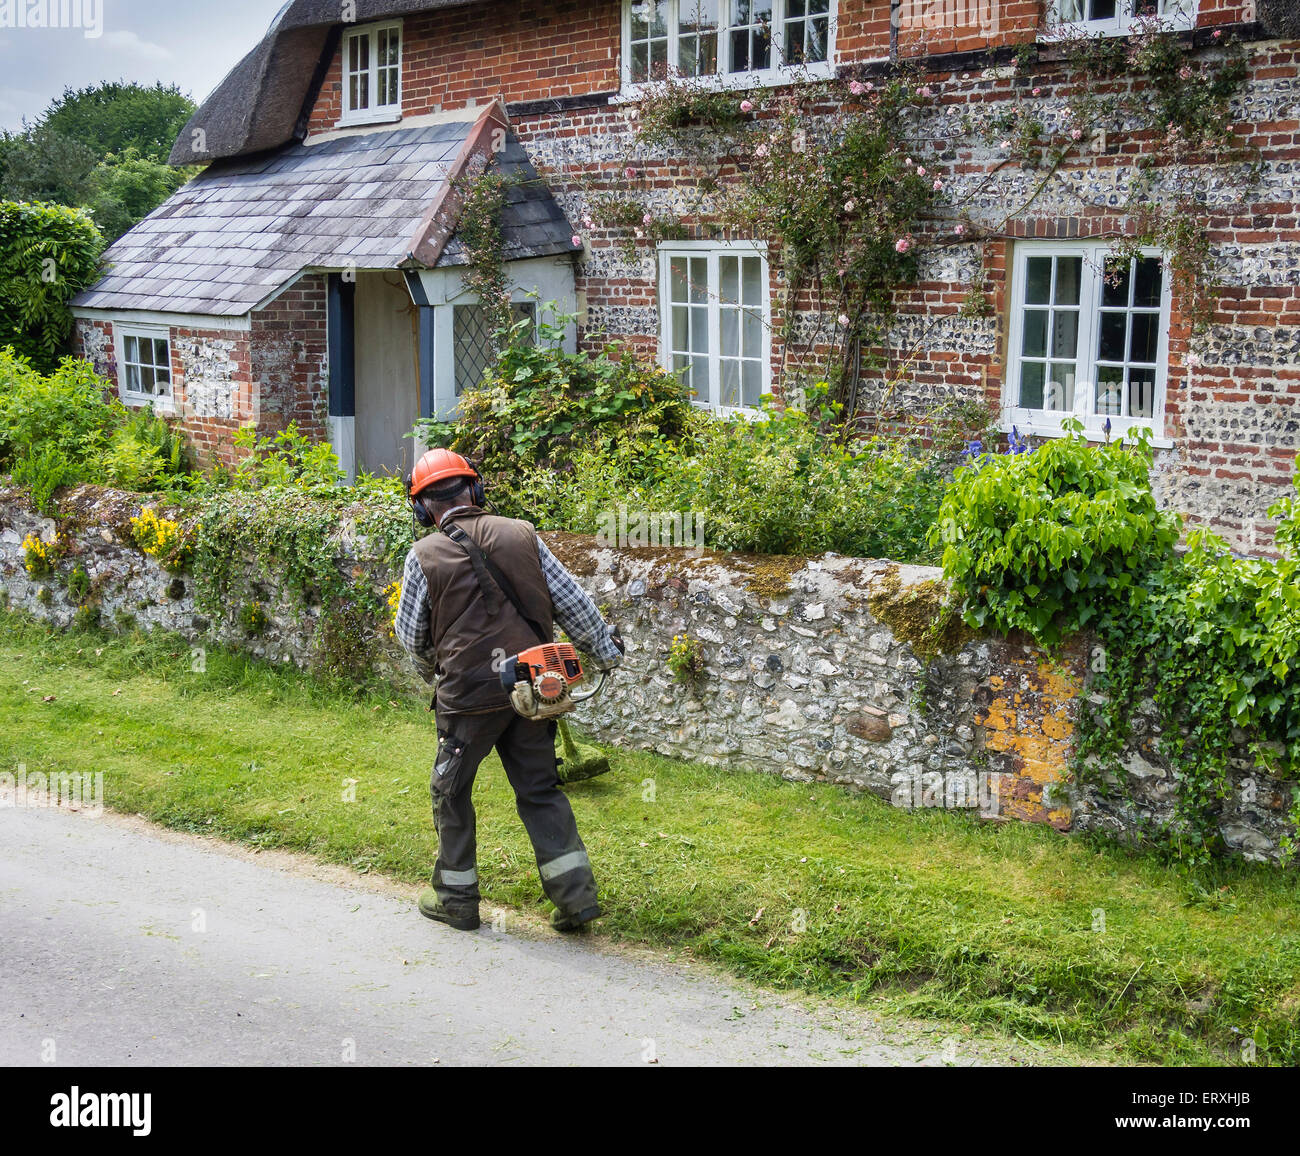 Man using strimmer in the village of Martin, Hampshire, England, UK Stock Photo